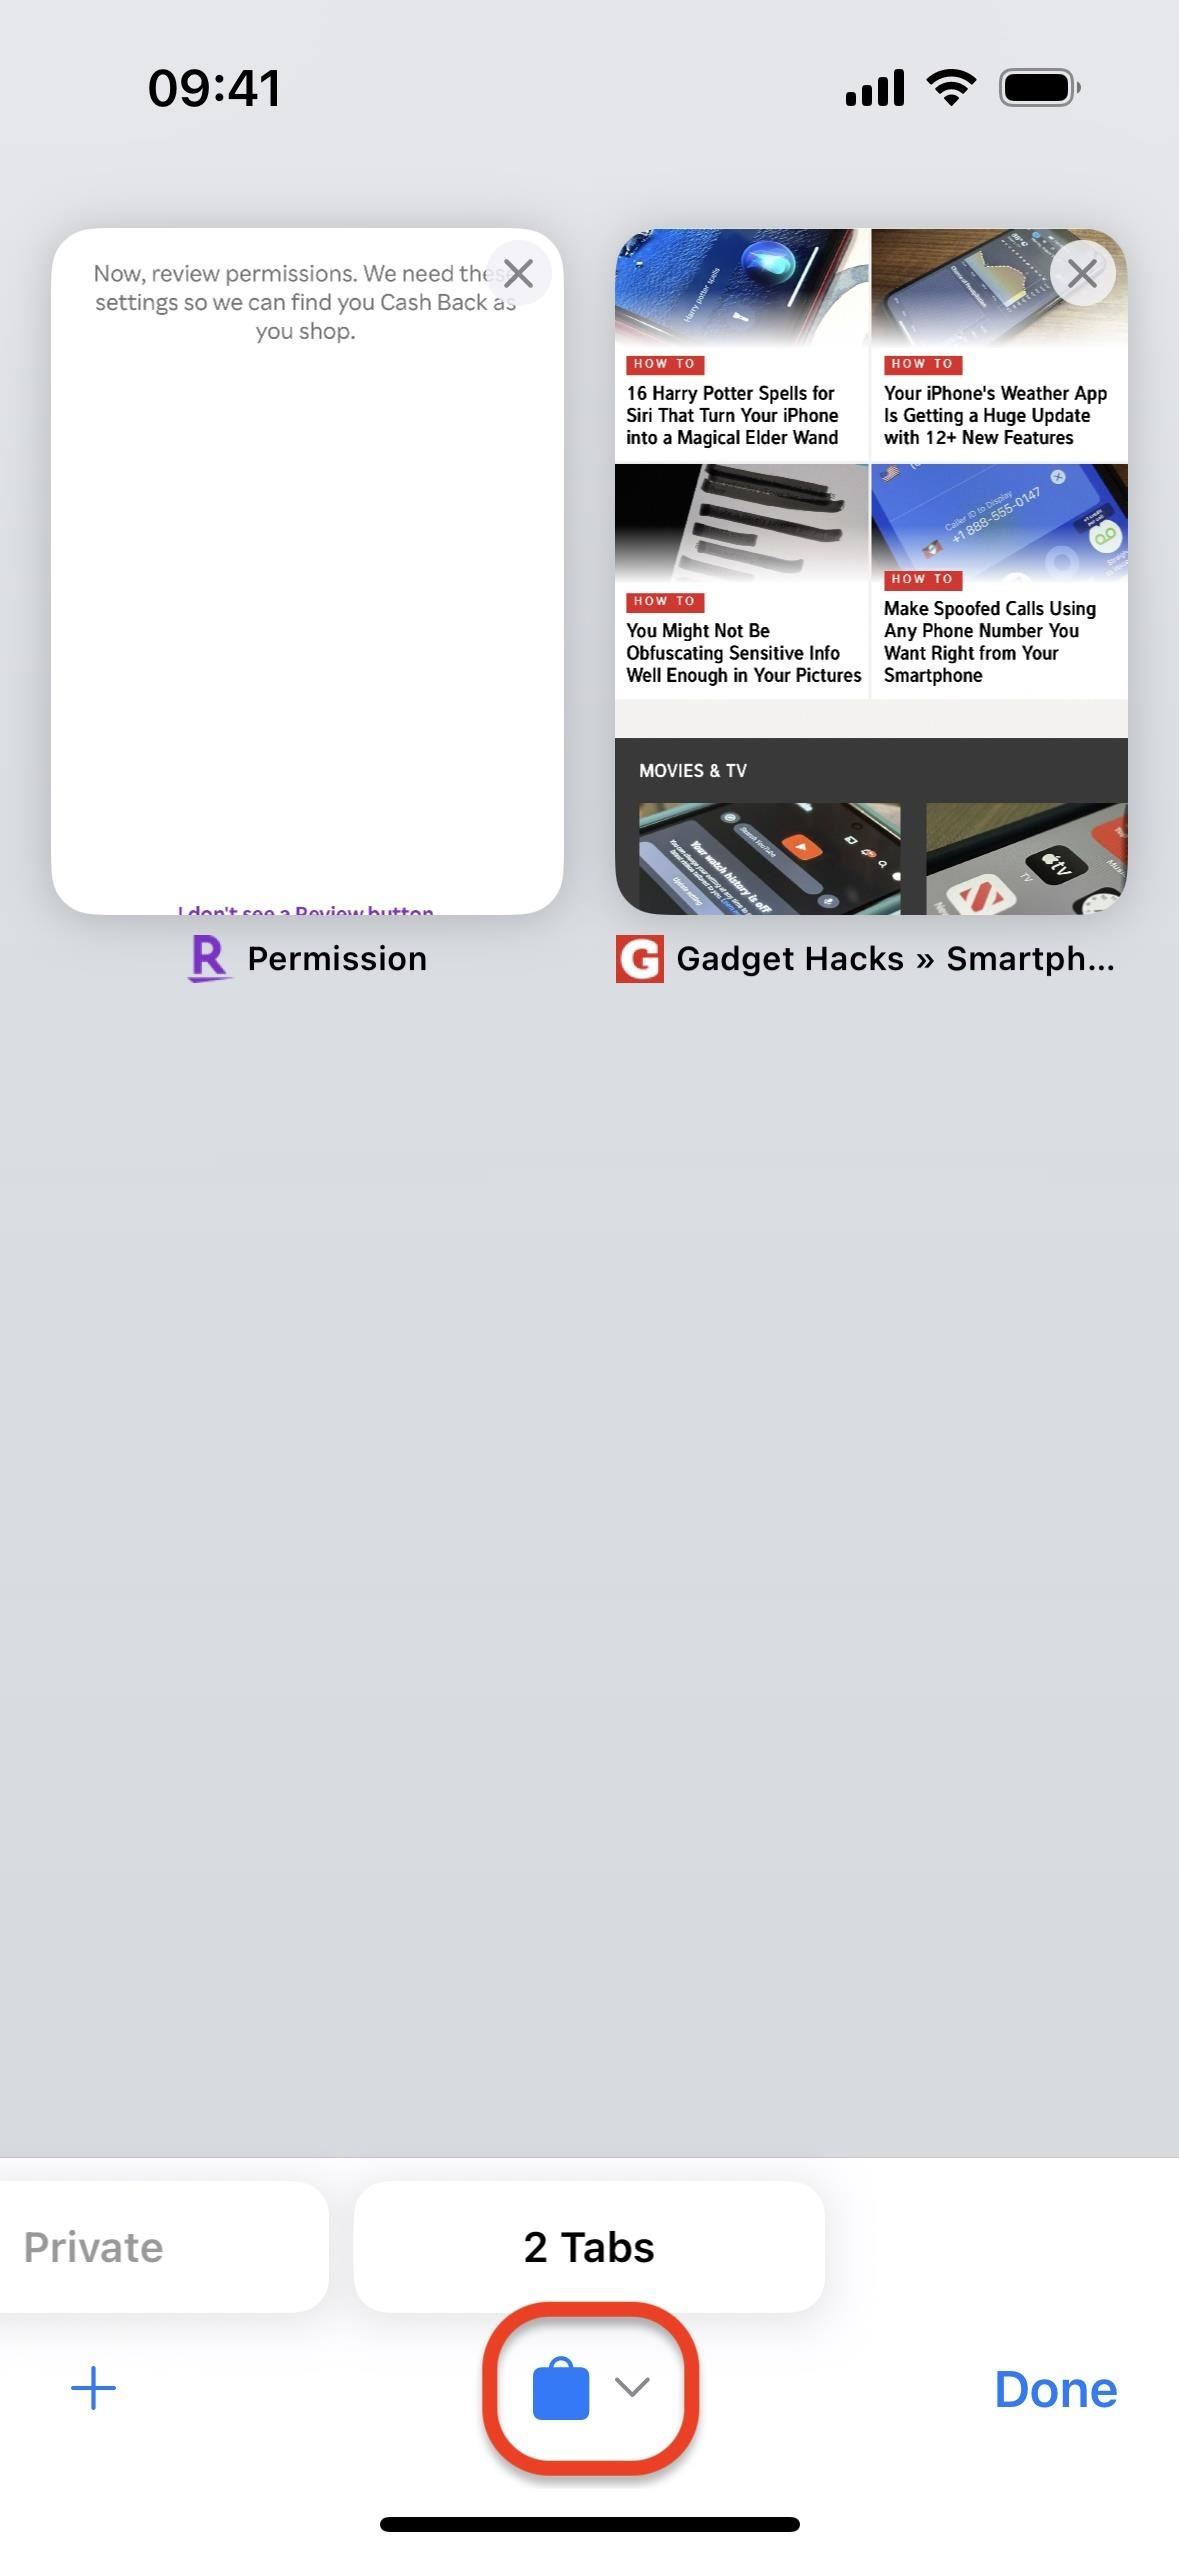 Create Safari Profiles to Separate Browsing Activity for Personal, Work, and Other Topics on Your iPhone or iPad